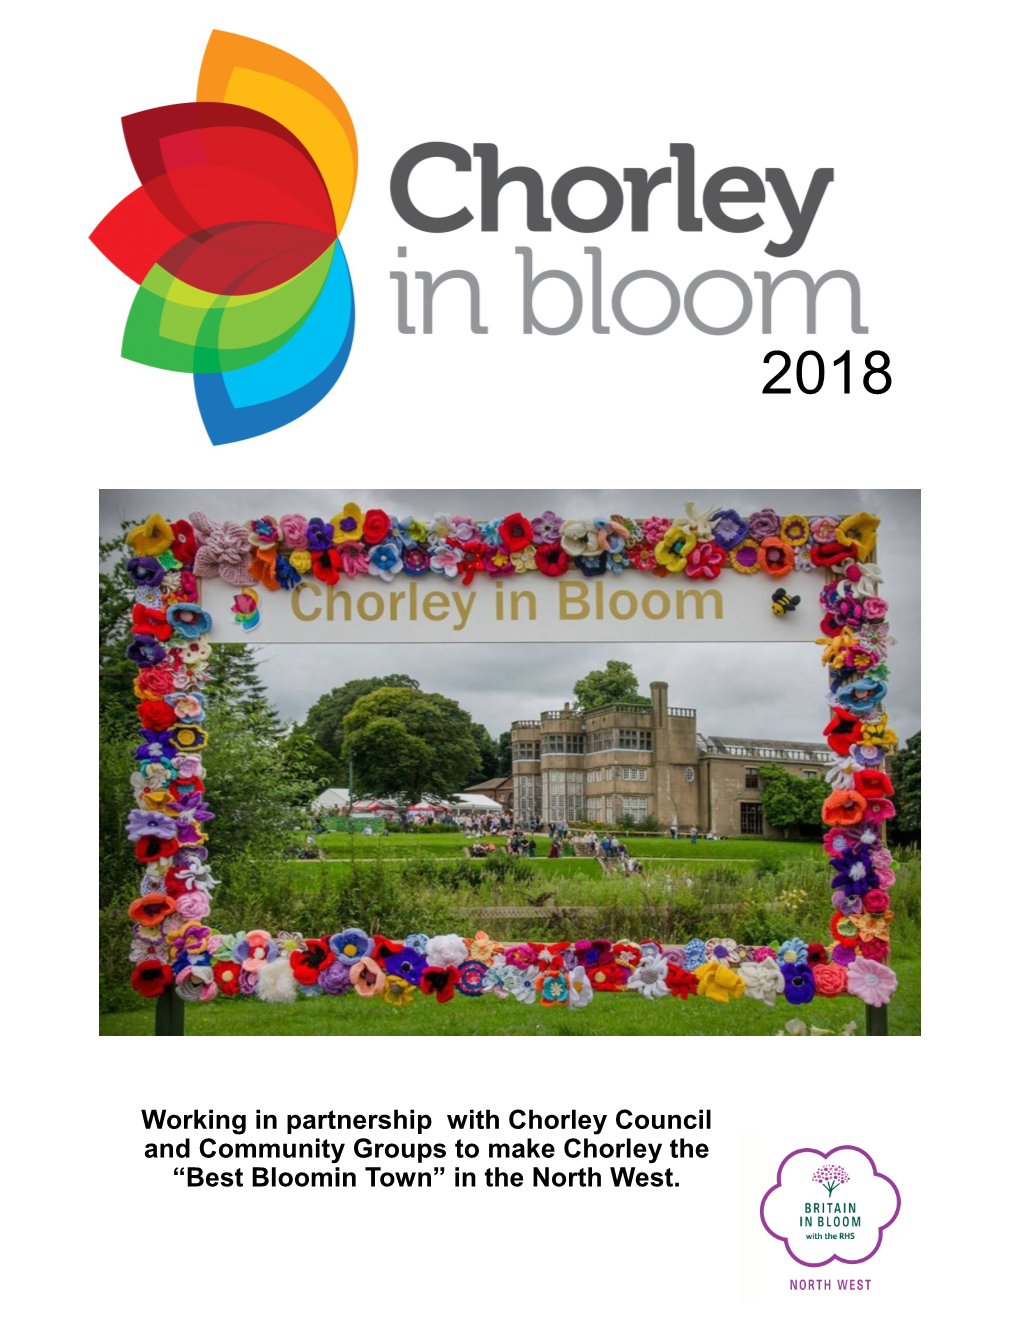 Working in Partnership with Chorley Council and Community Groups to Make Chorley the “Best Bloomin Town” in the North West